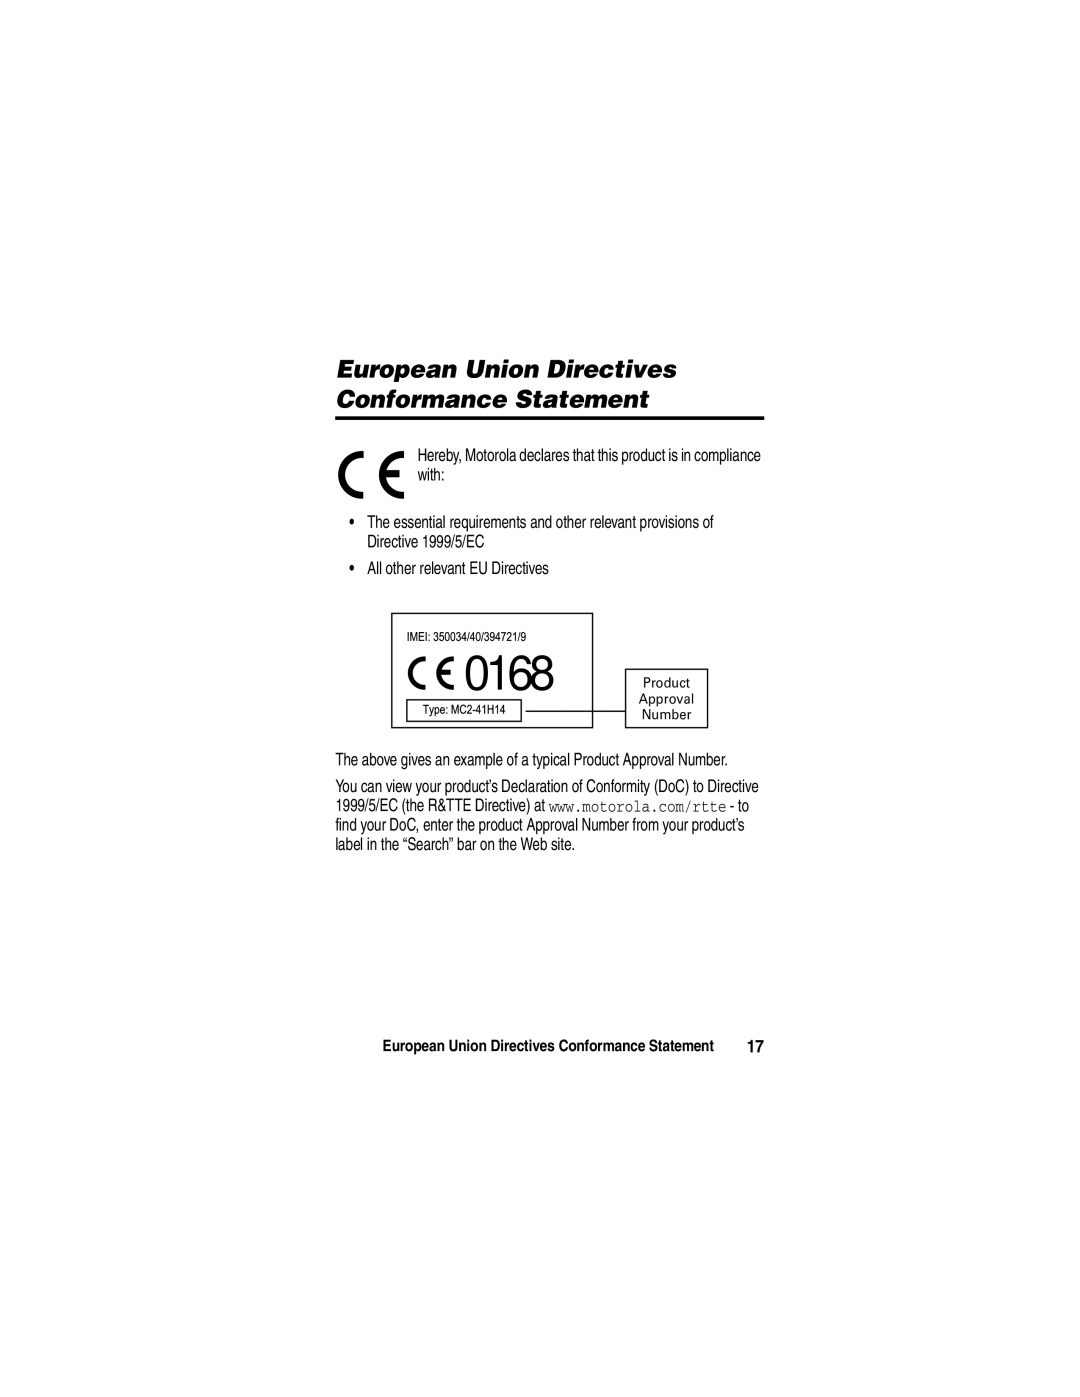 Motorola A780 manual European Union Directives Conformance Statement, 0168, Product Approval Number 